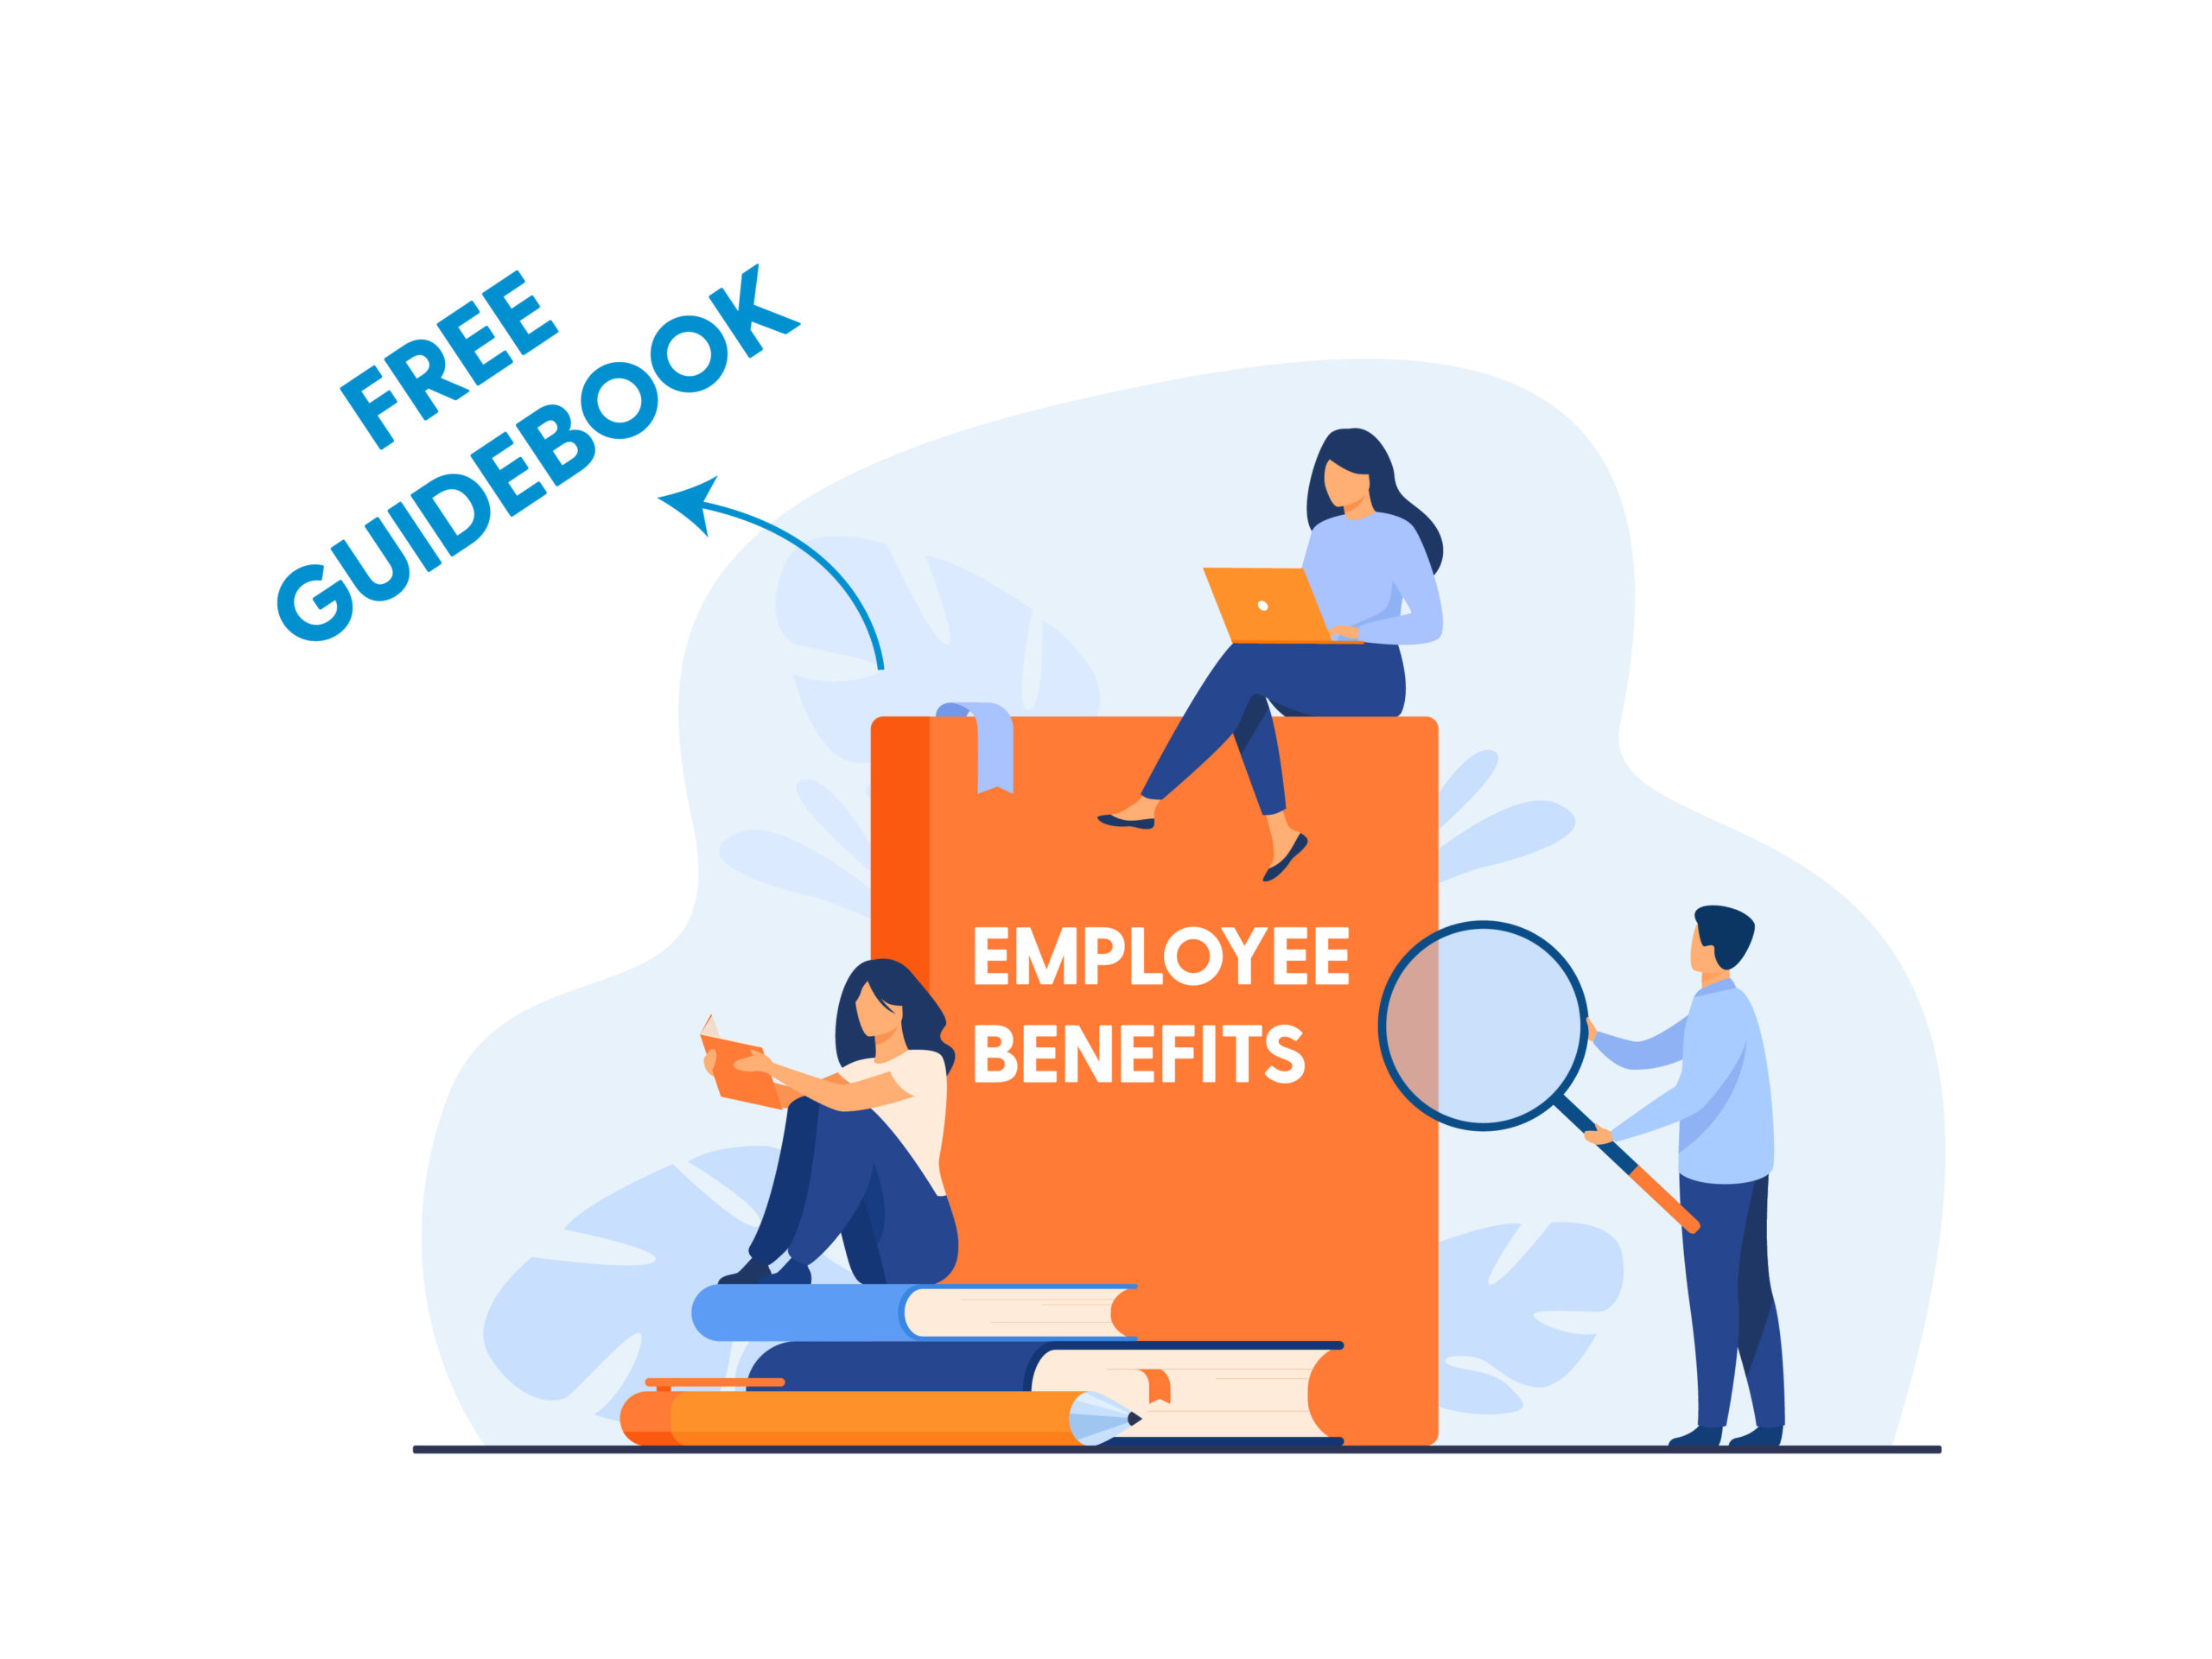 How to track corporate employee benefits (free guidebook)